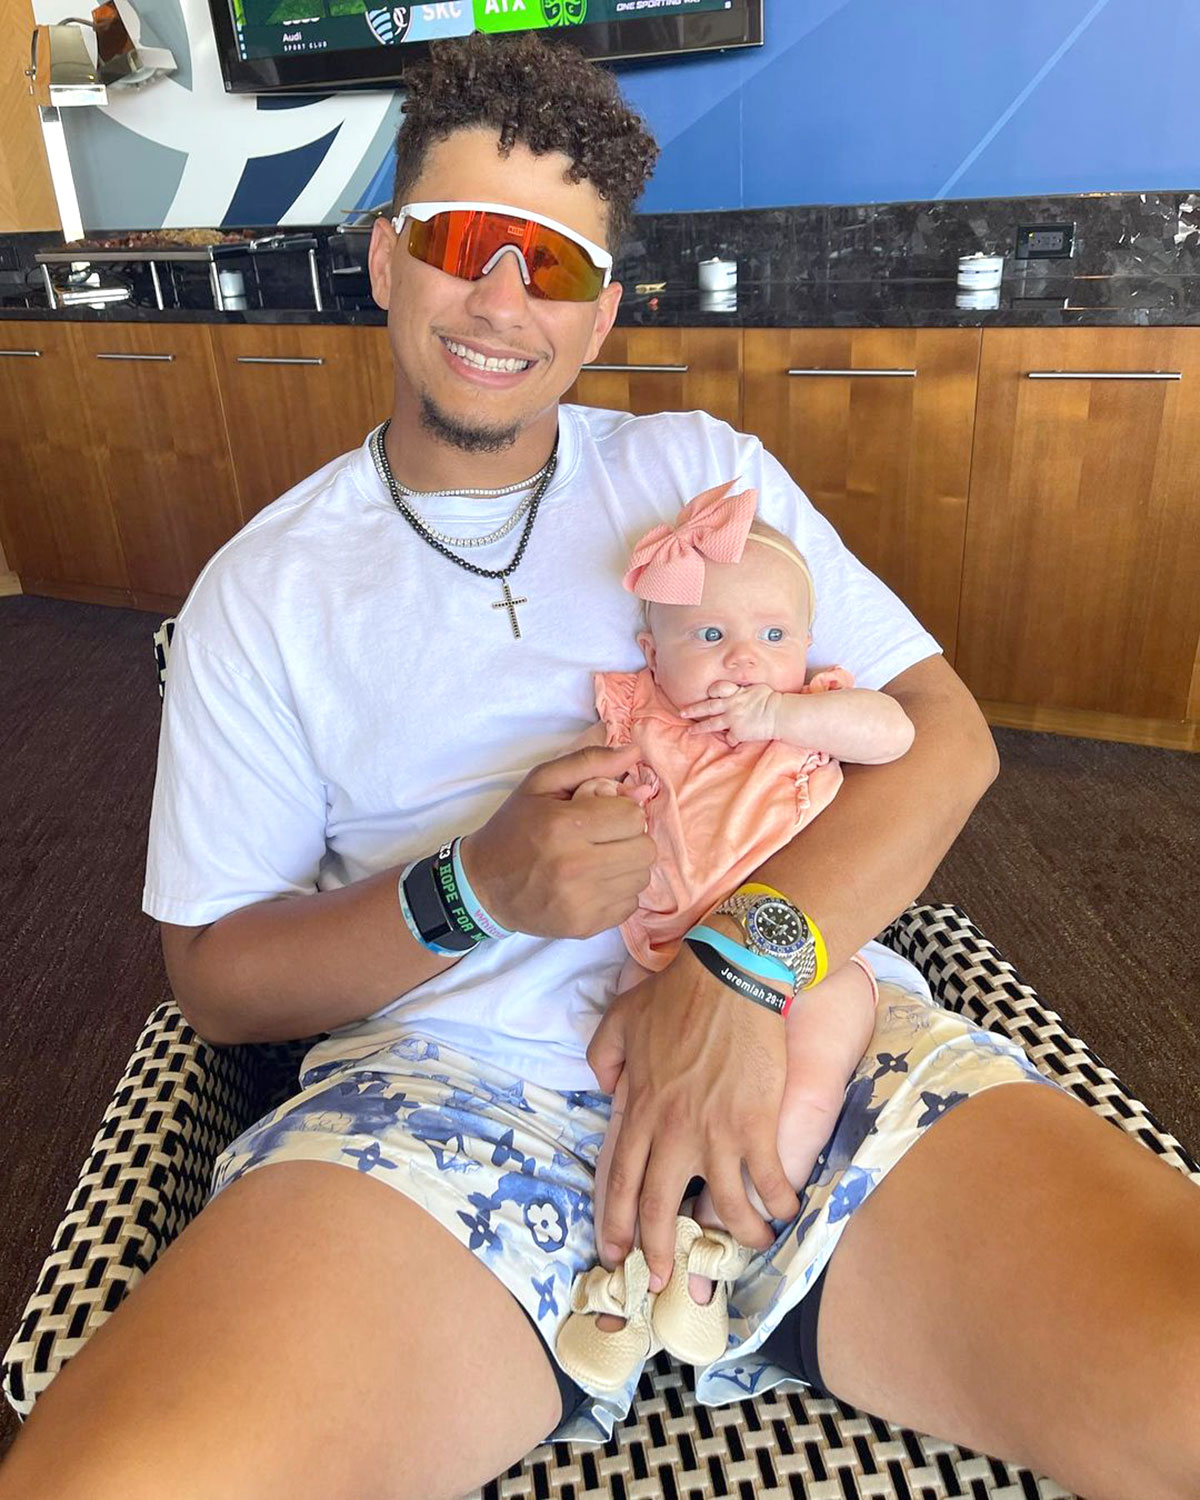 Brittany & Patrick Mahomes' New Photos With Kids During Outside Time –  SheKnows